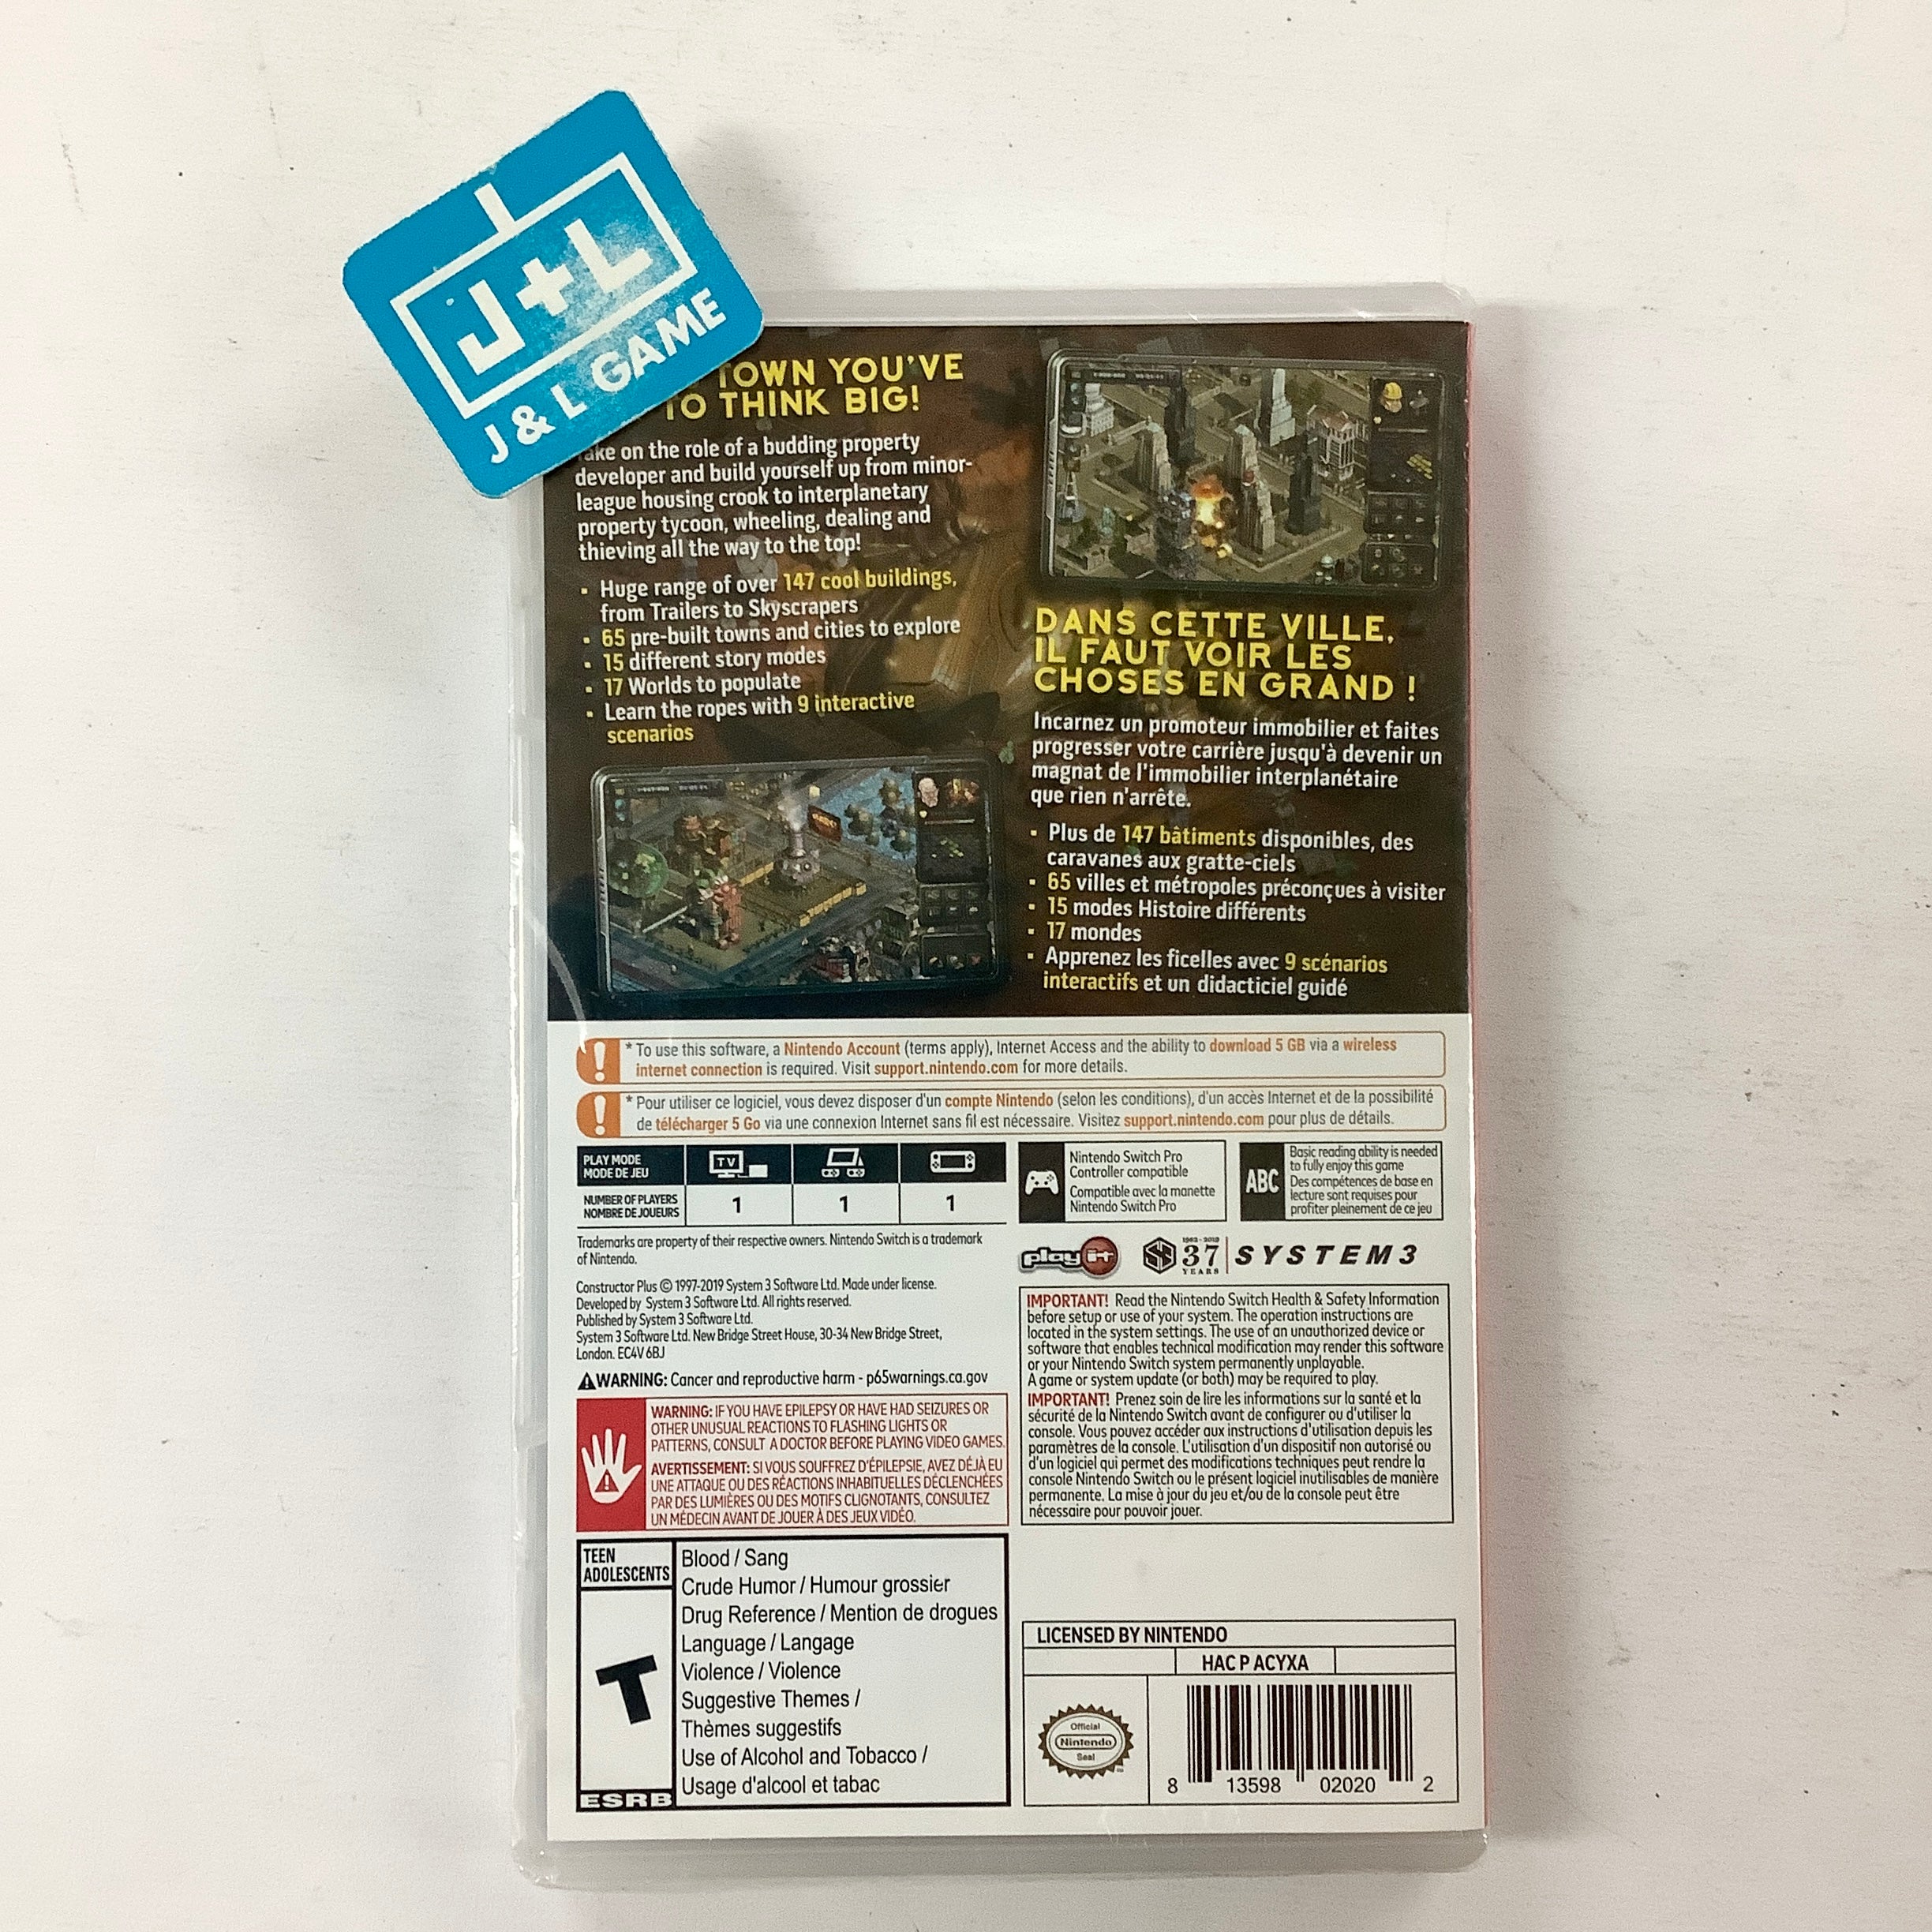 Constructor Plus (No Game Card) - (NSW) Nintendo Switch Video Games Play It   